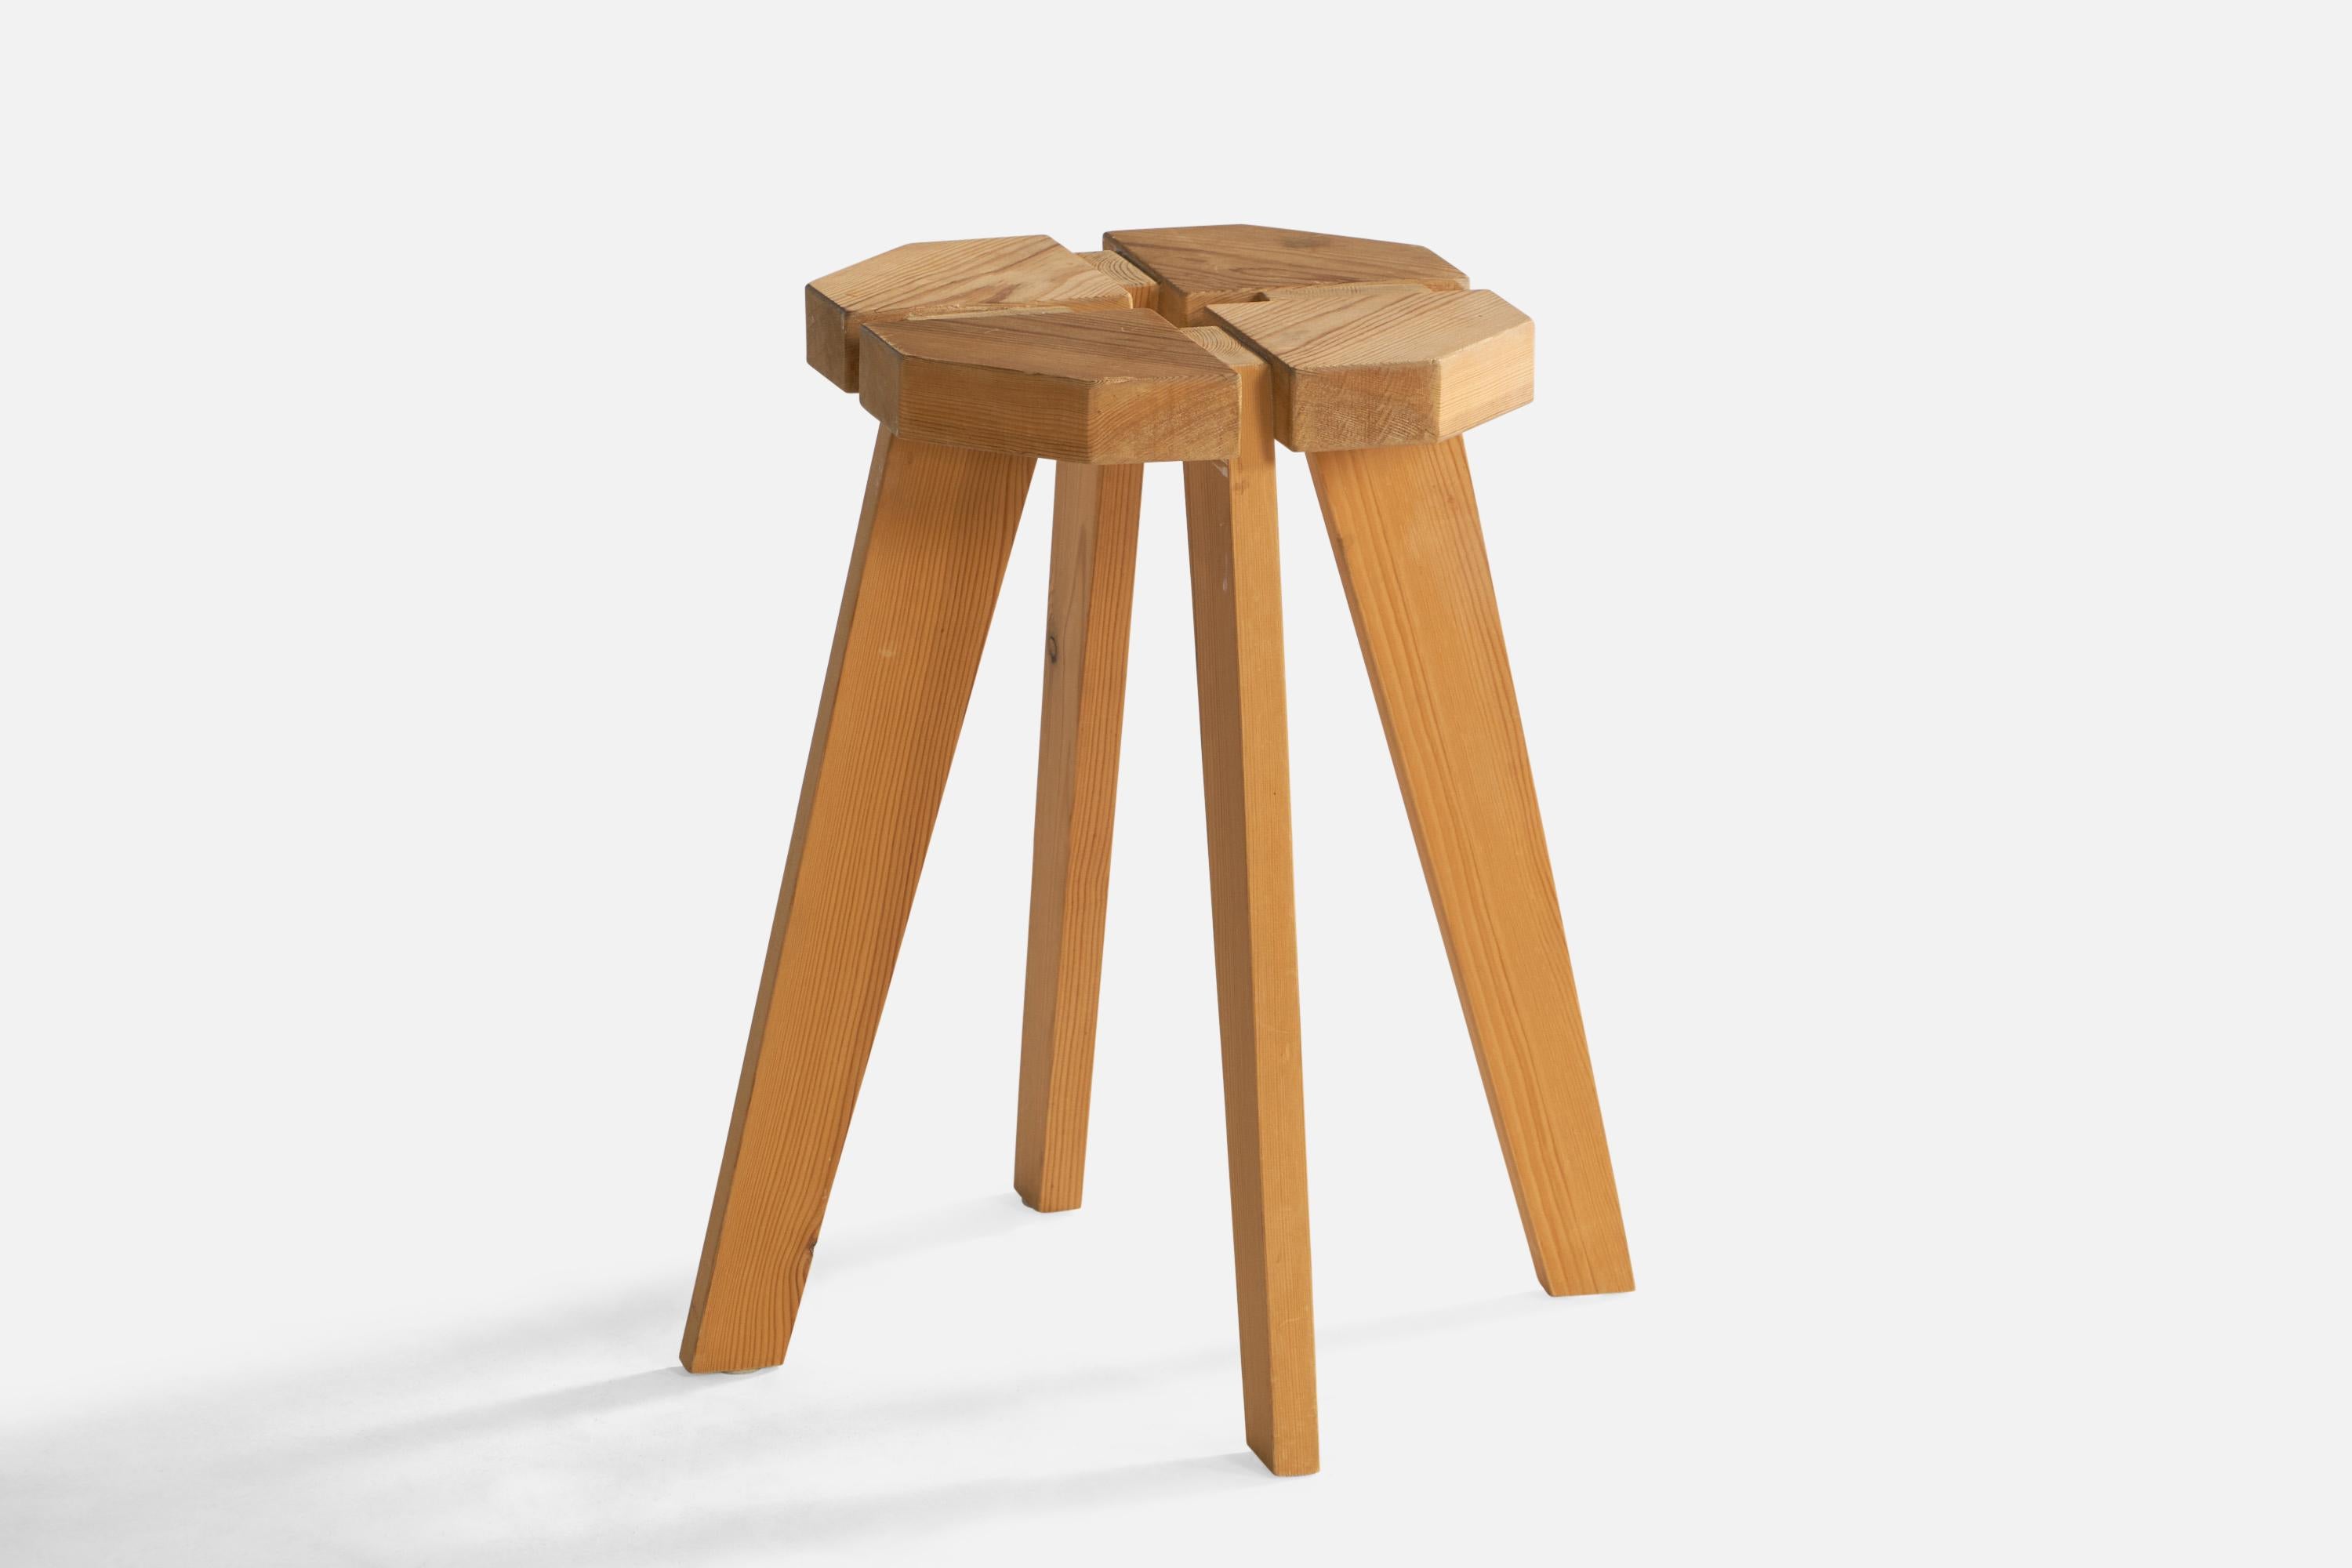 A pine stool designed and produced in Sweden, 1970s.

Seat height: 17.2”